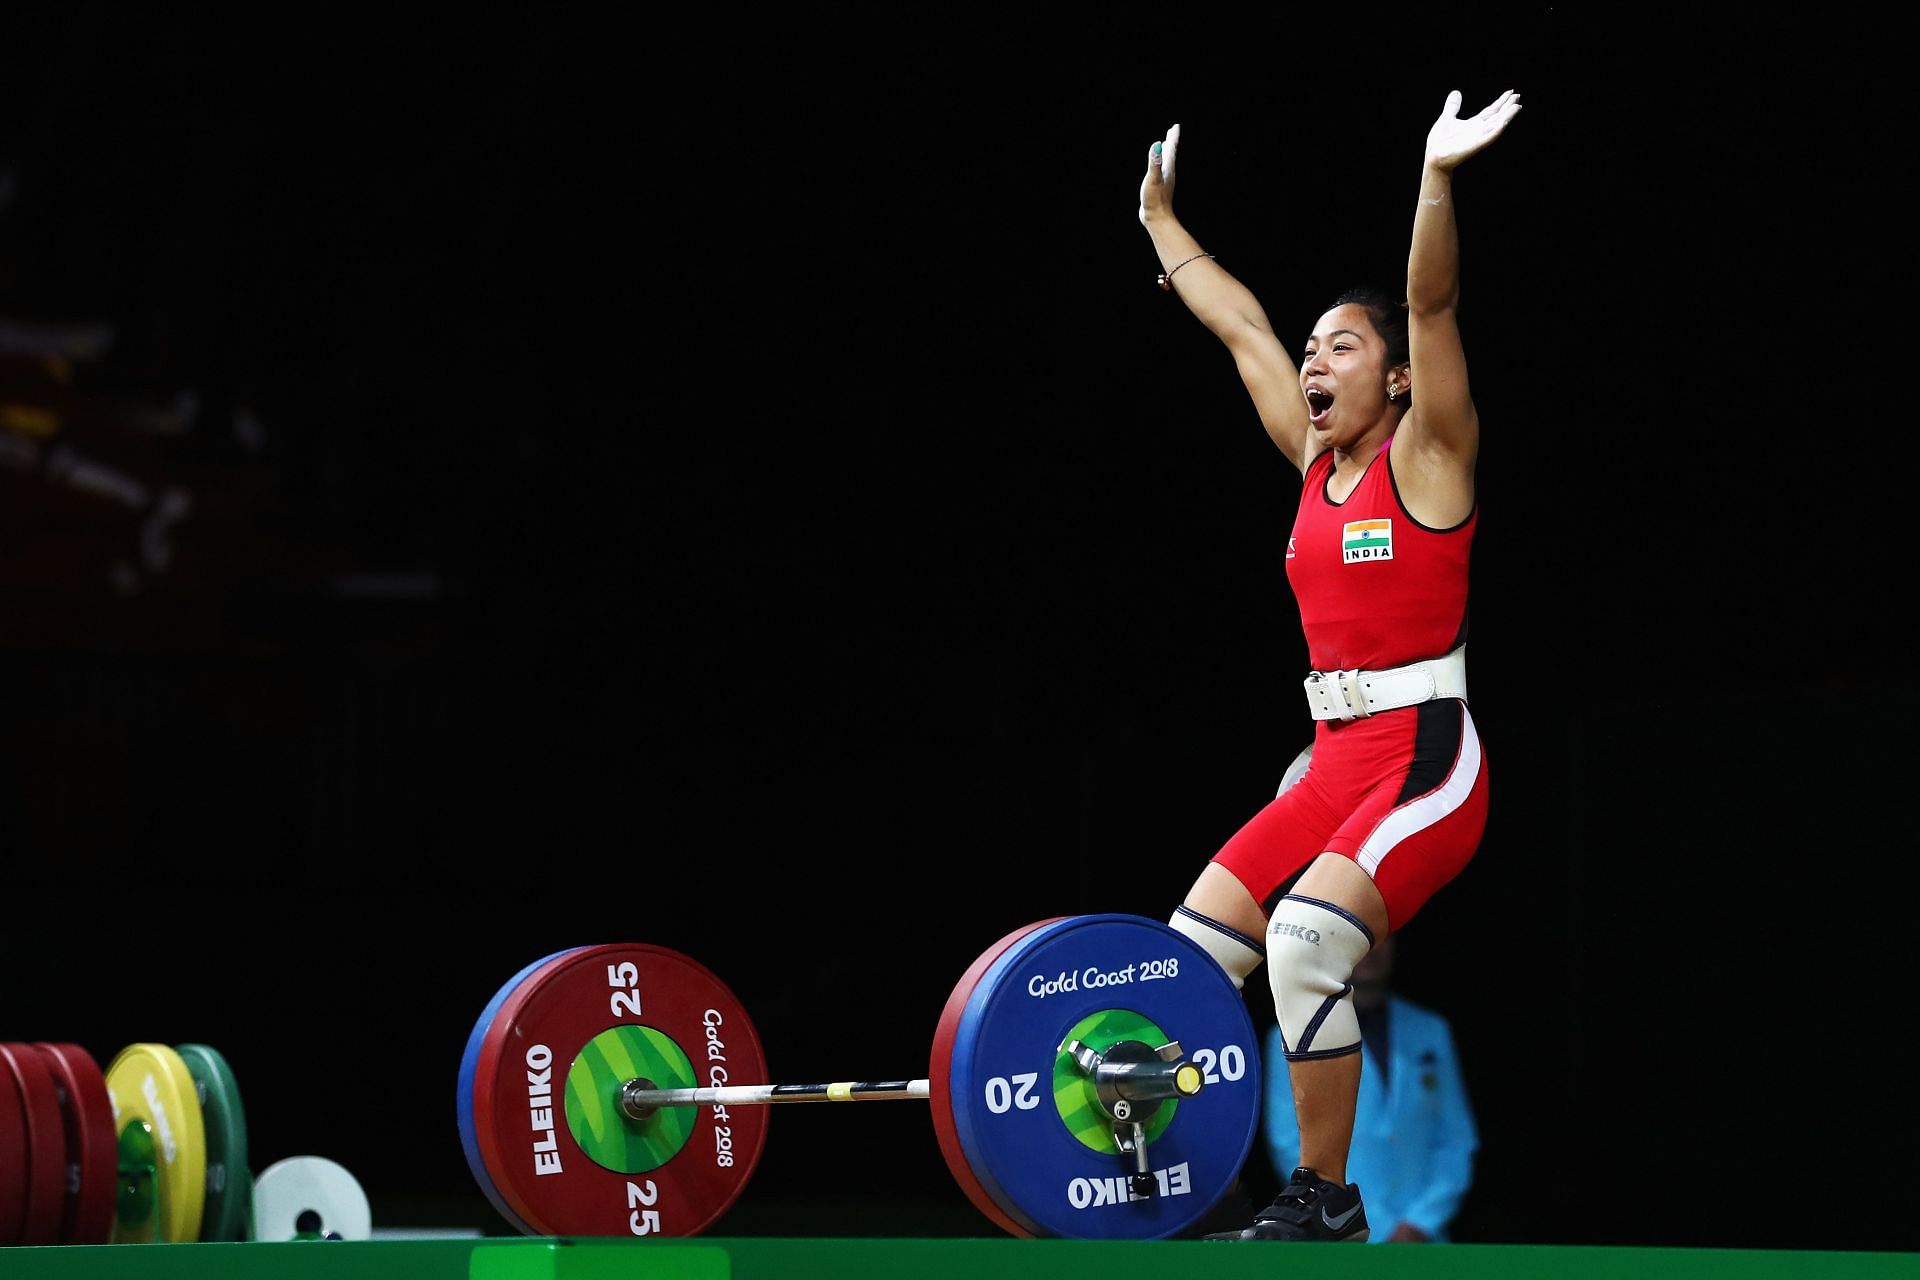 Mirabai Chanu hopes to breach the 90kg mark in snatch at the Commonwealth Games. (PC: Getty)